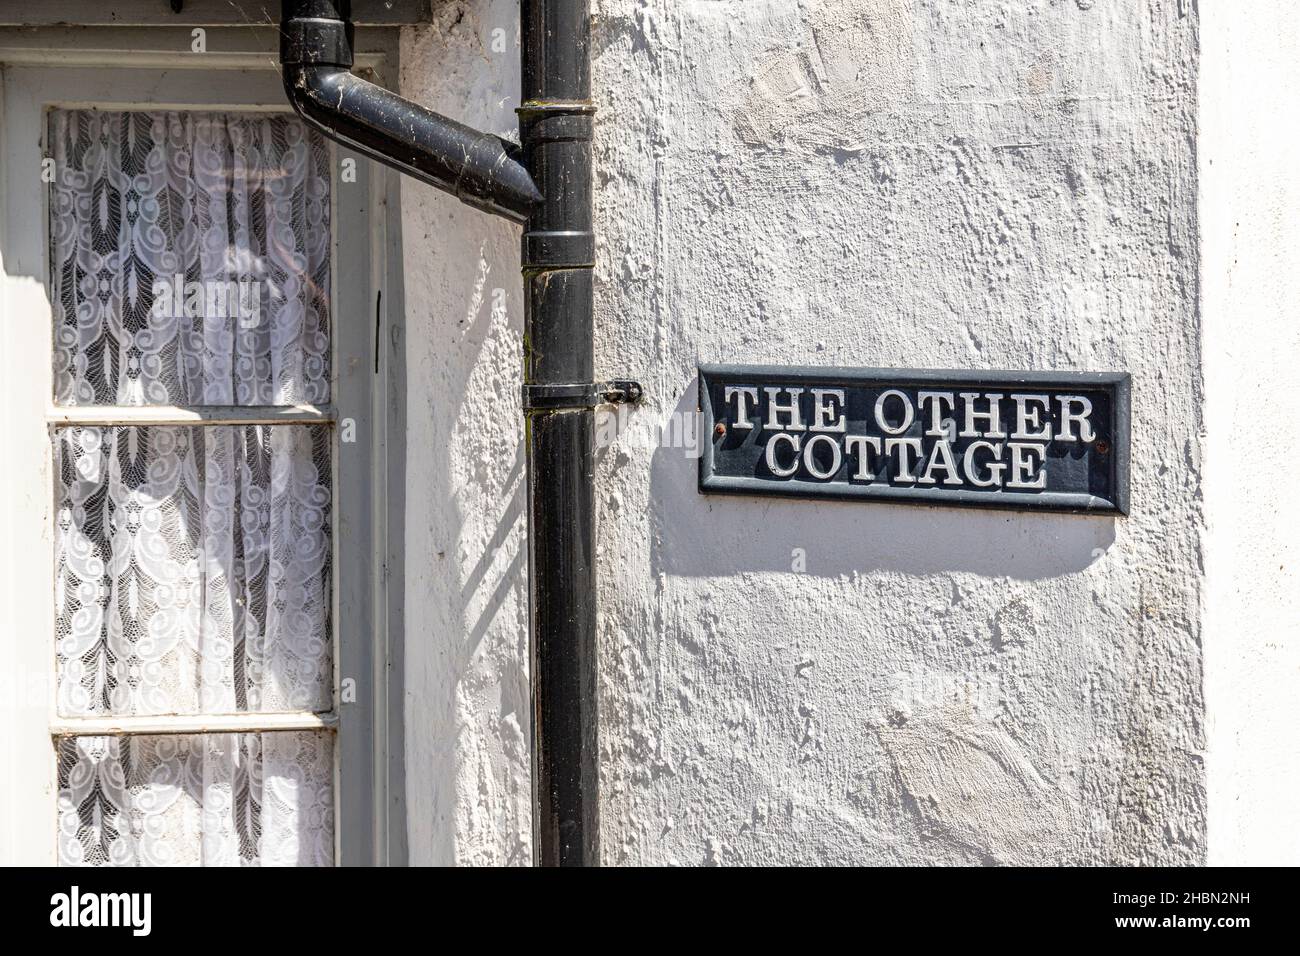 The Other Cottage - An unusual house name in the Exmoor village of Porlock, Somerset UK Stock Photo